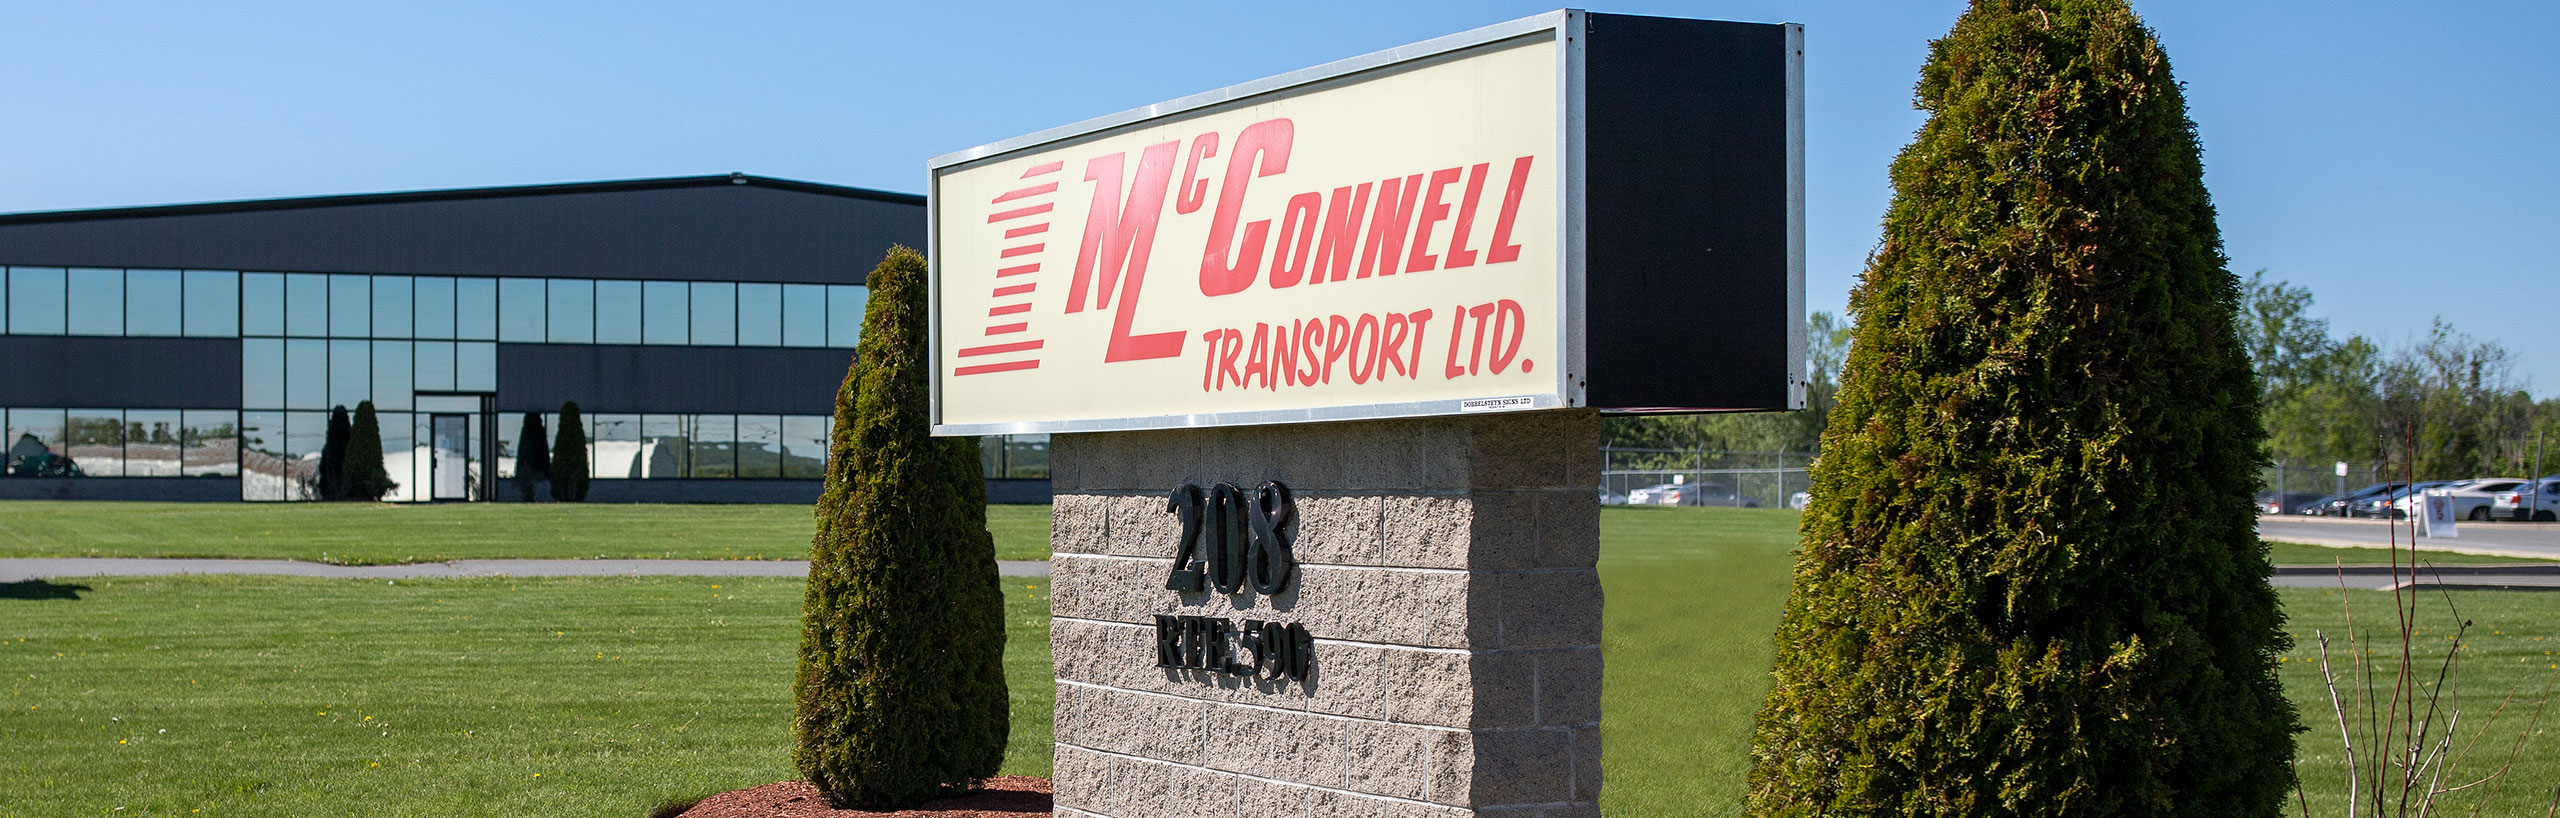 McConnell Transport sign in front of their office building